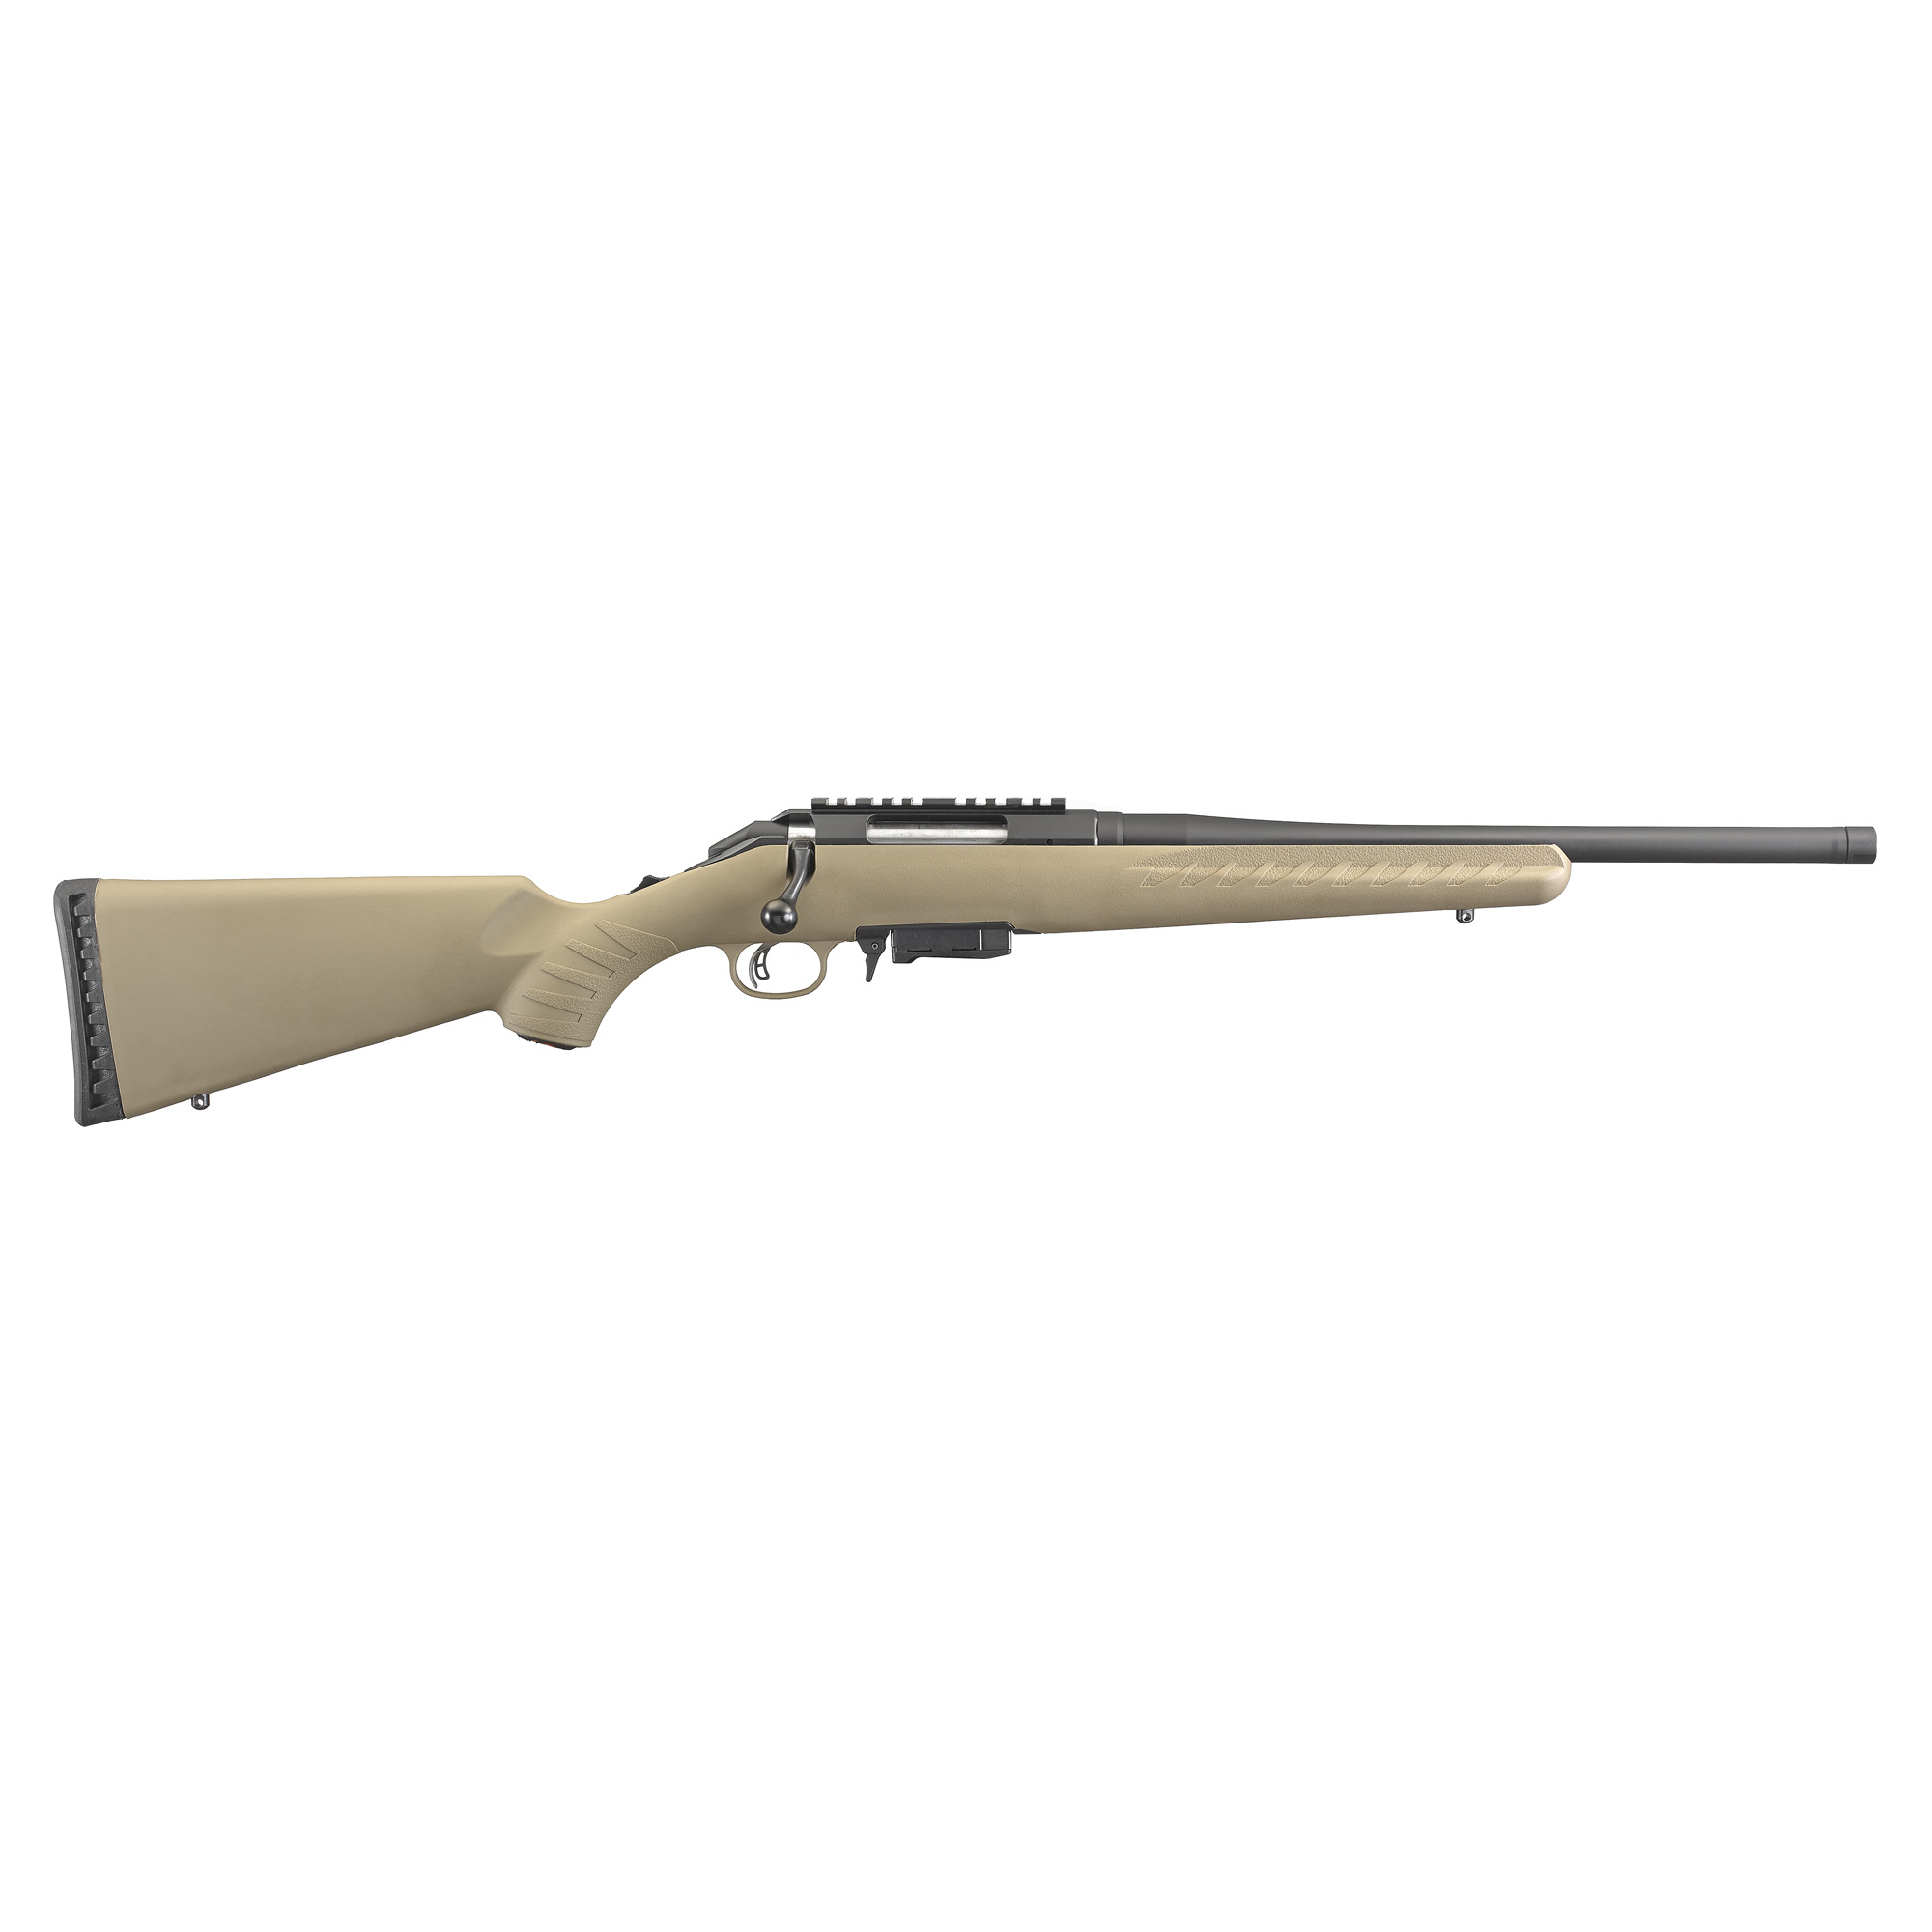 RUGER AMERICAN RNCH 762X39 16.1 5RD